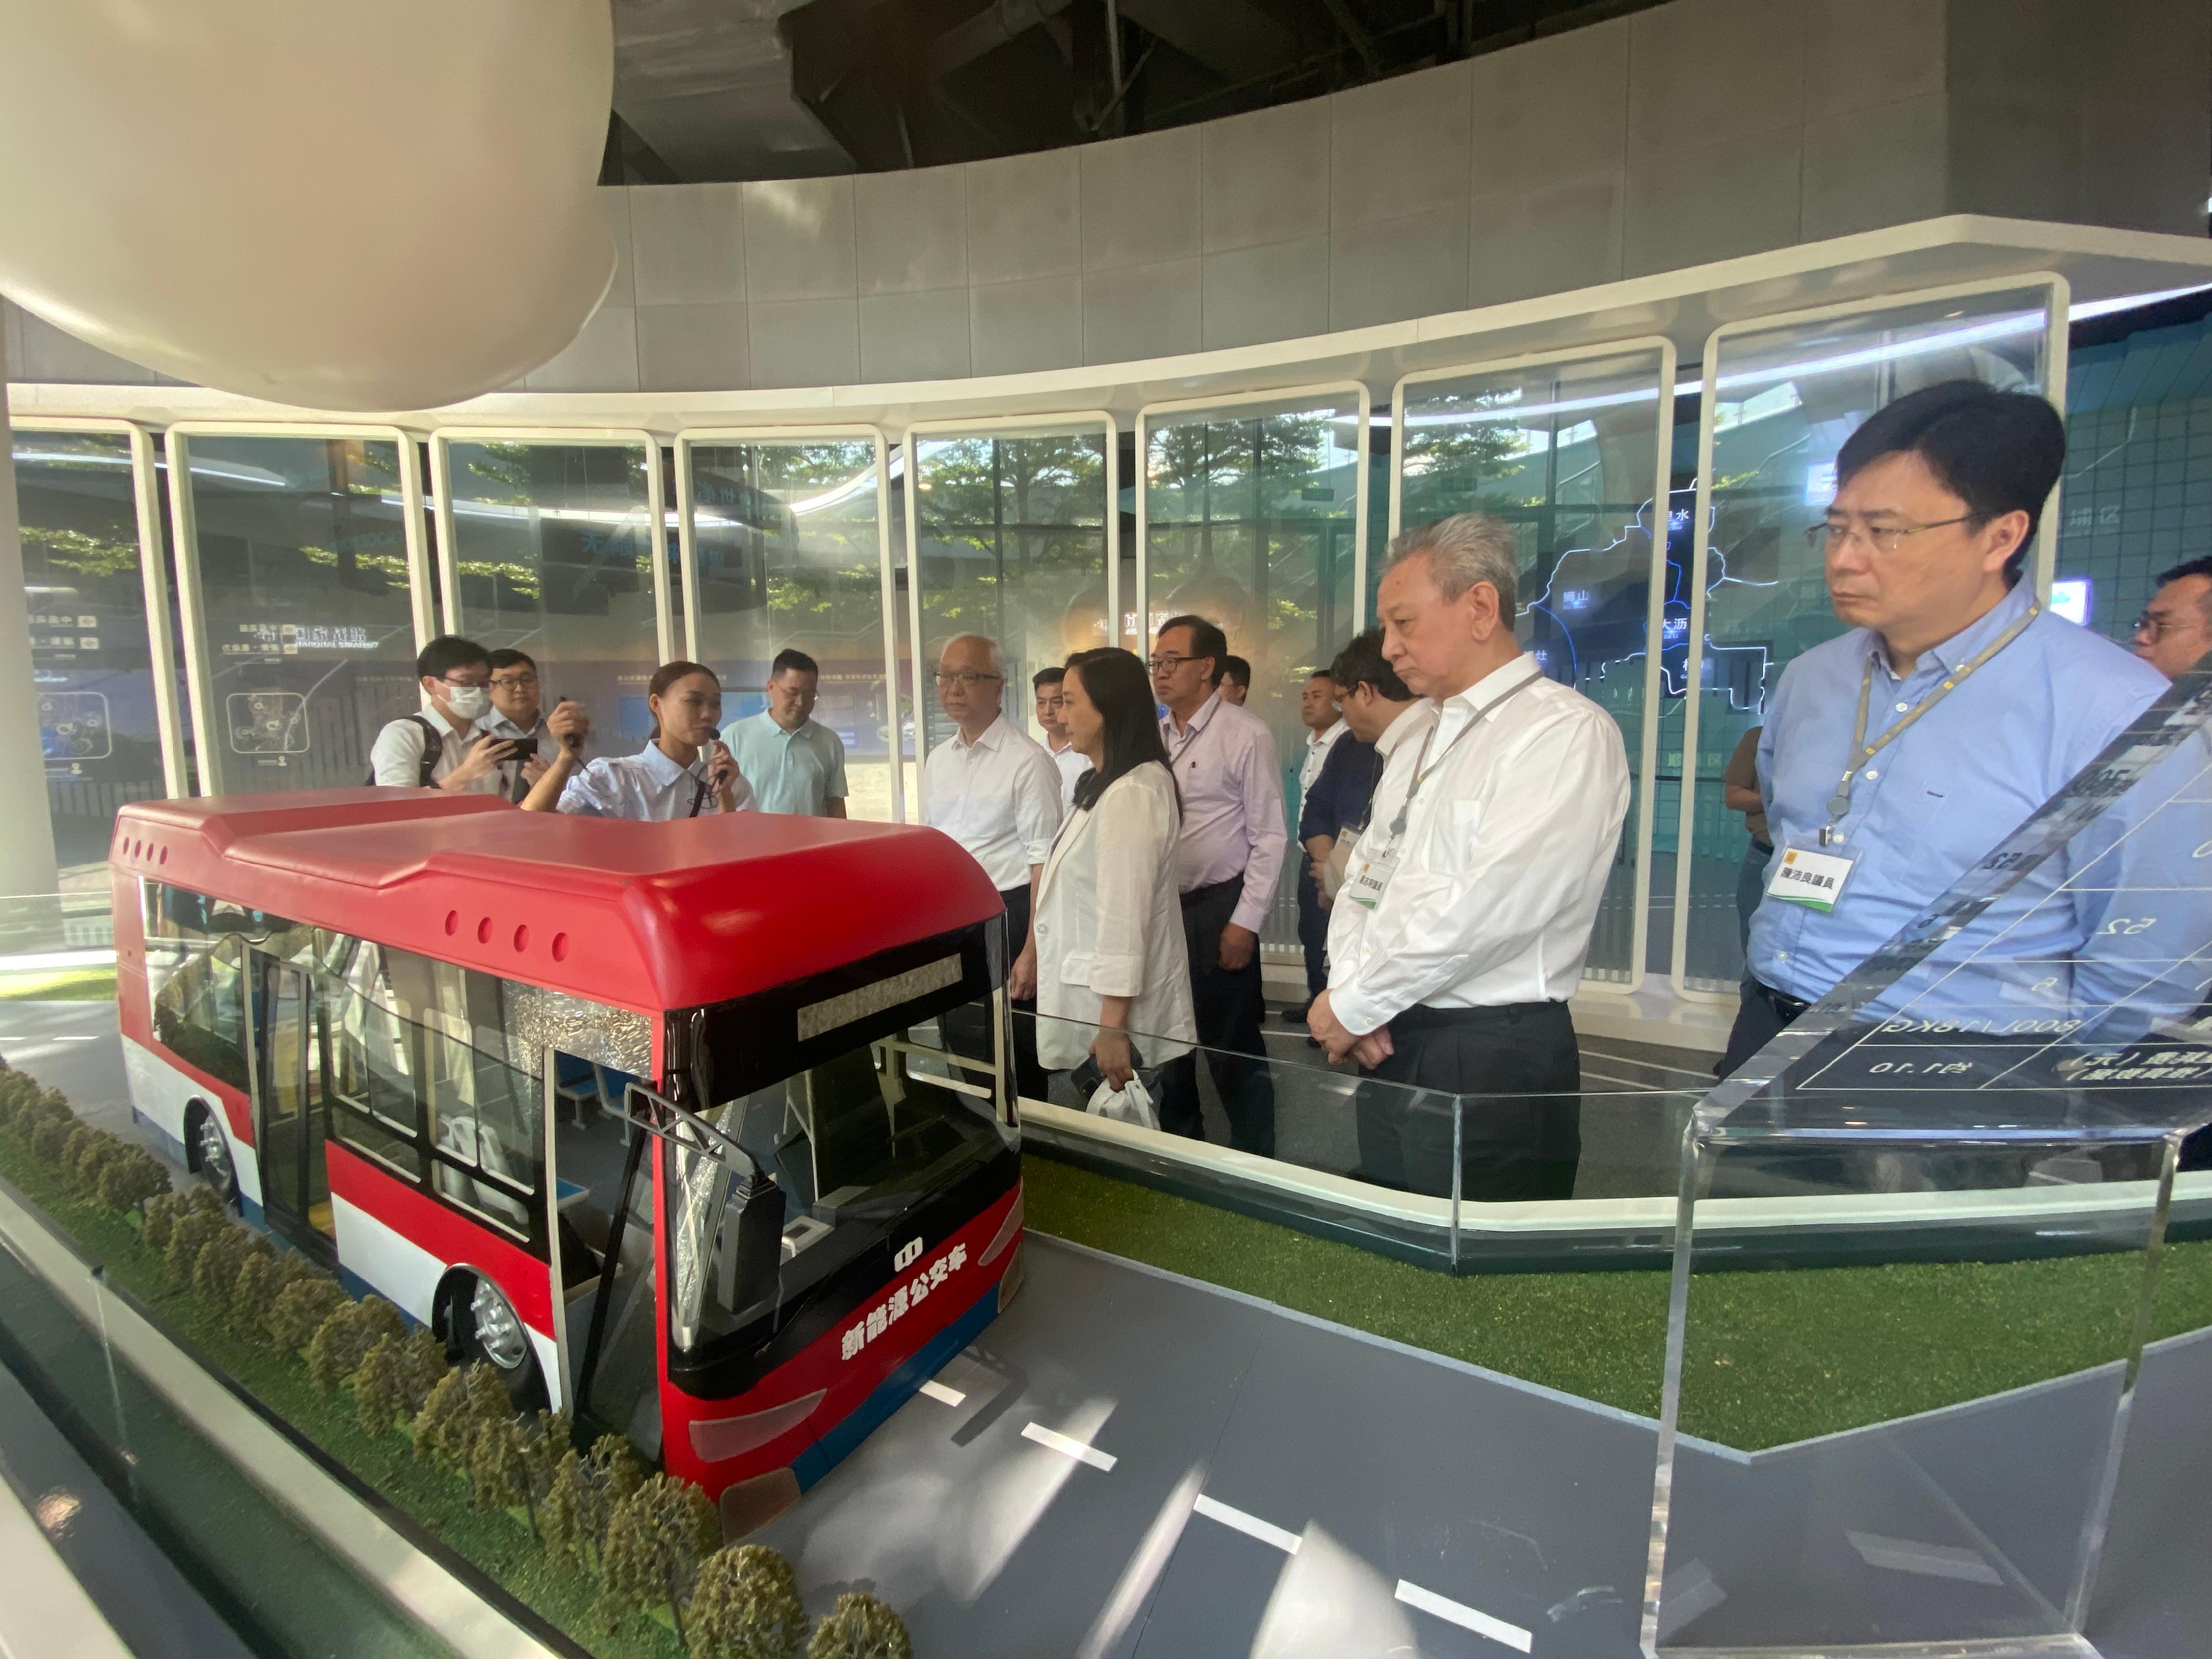 The Secretary for Environment and Ecology, Mr Tse Chin-wan, together with the Legislative Council Panel on Environmental Affairs, today (August 8) visited the Nanhai Hydrogen Center in Foshan in the morning. Photo shows Mr Tse (fifth left) and the delegation of the Legislative Council Panel on Environmental Affairs receiving a briefing from a representative on the planning and achievements of hydrogen energy development in Foshan to learn more about the development and application of hydrogen energy in the Mainland.